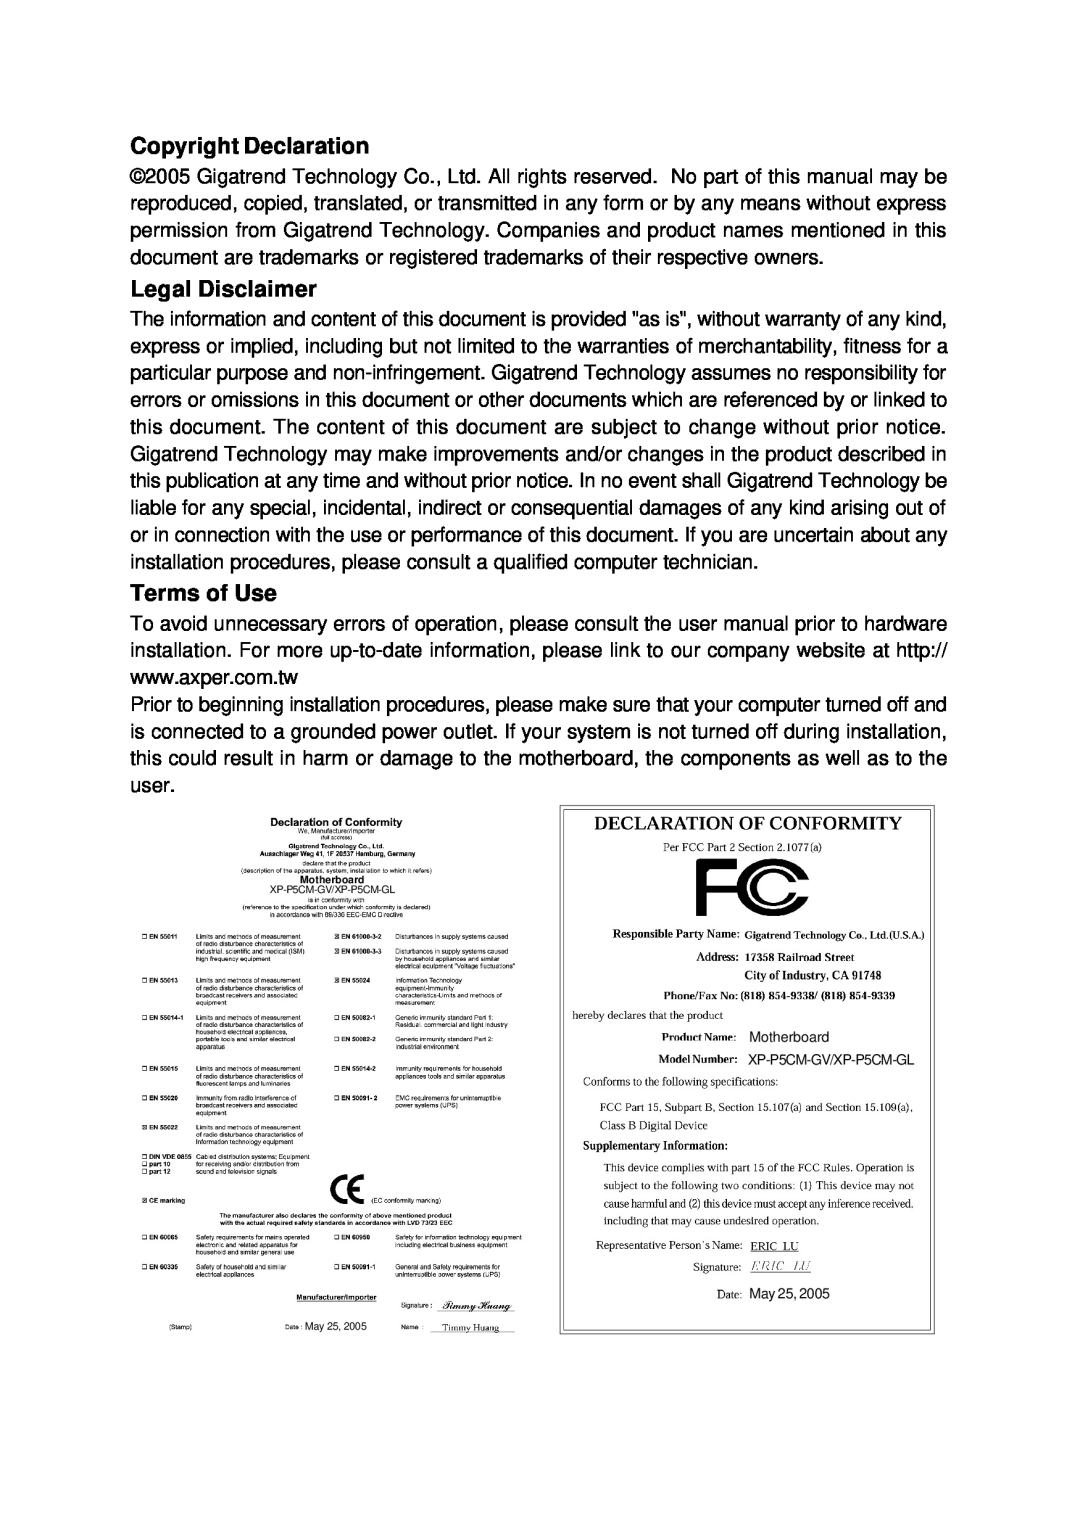 Intel user manual Copyright Declaration, Legal Disclaimer, Terms of Use, Motherboard XP-P5CM-GV/XP-P5CM-GL May 